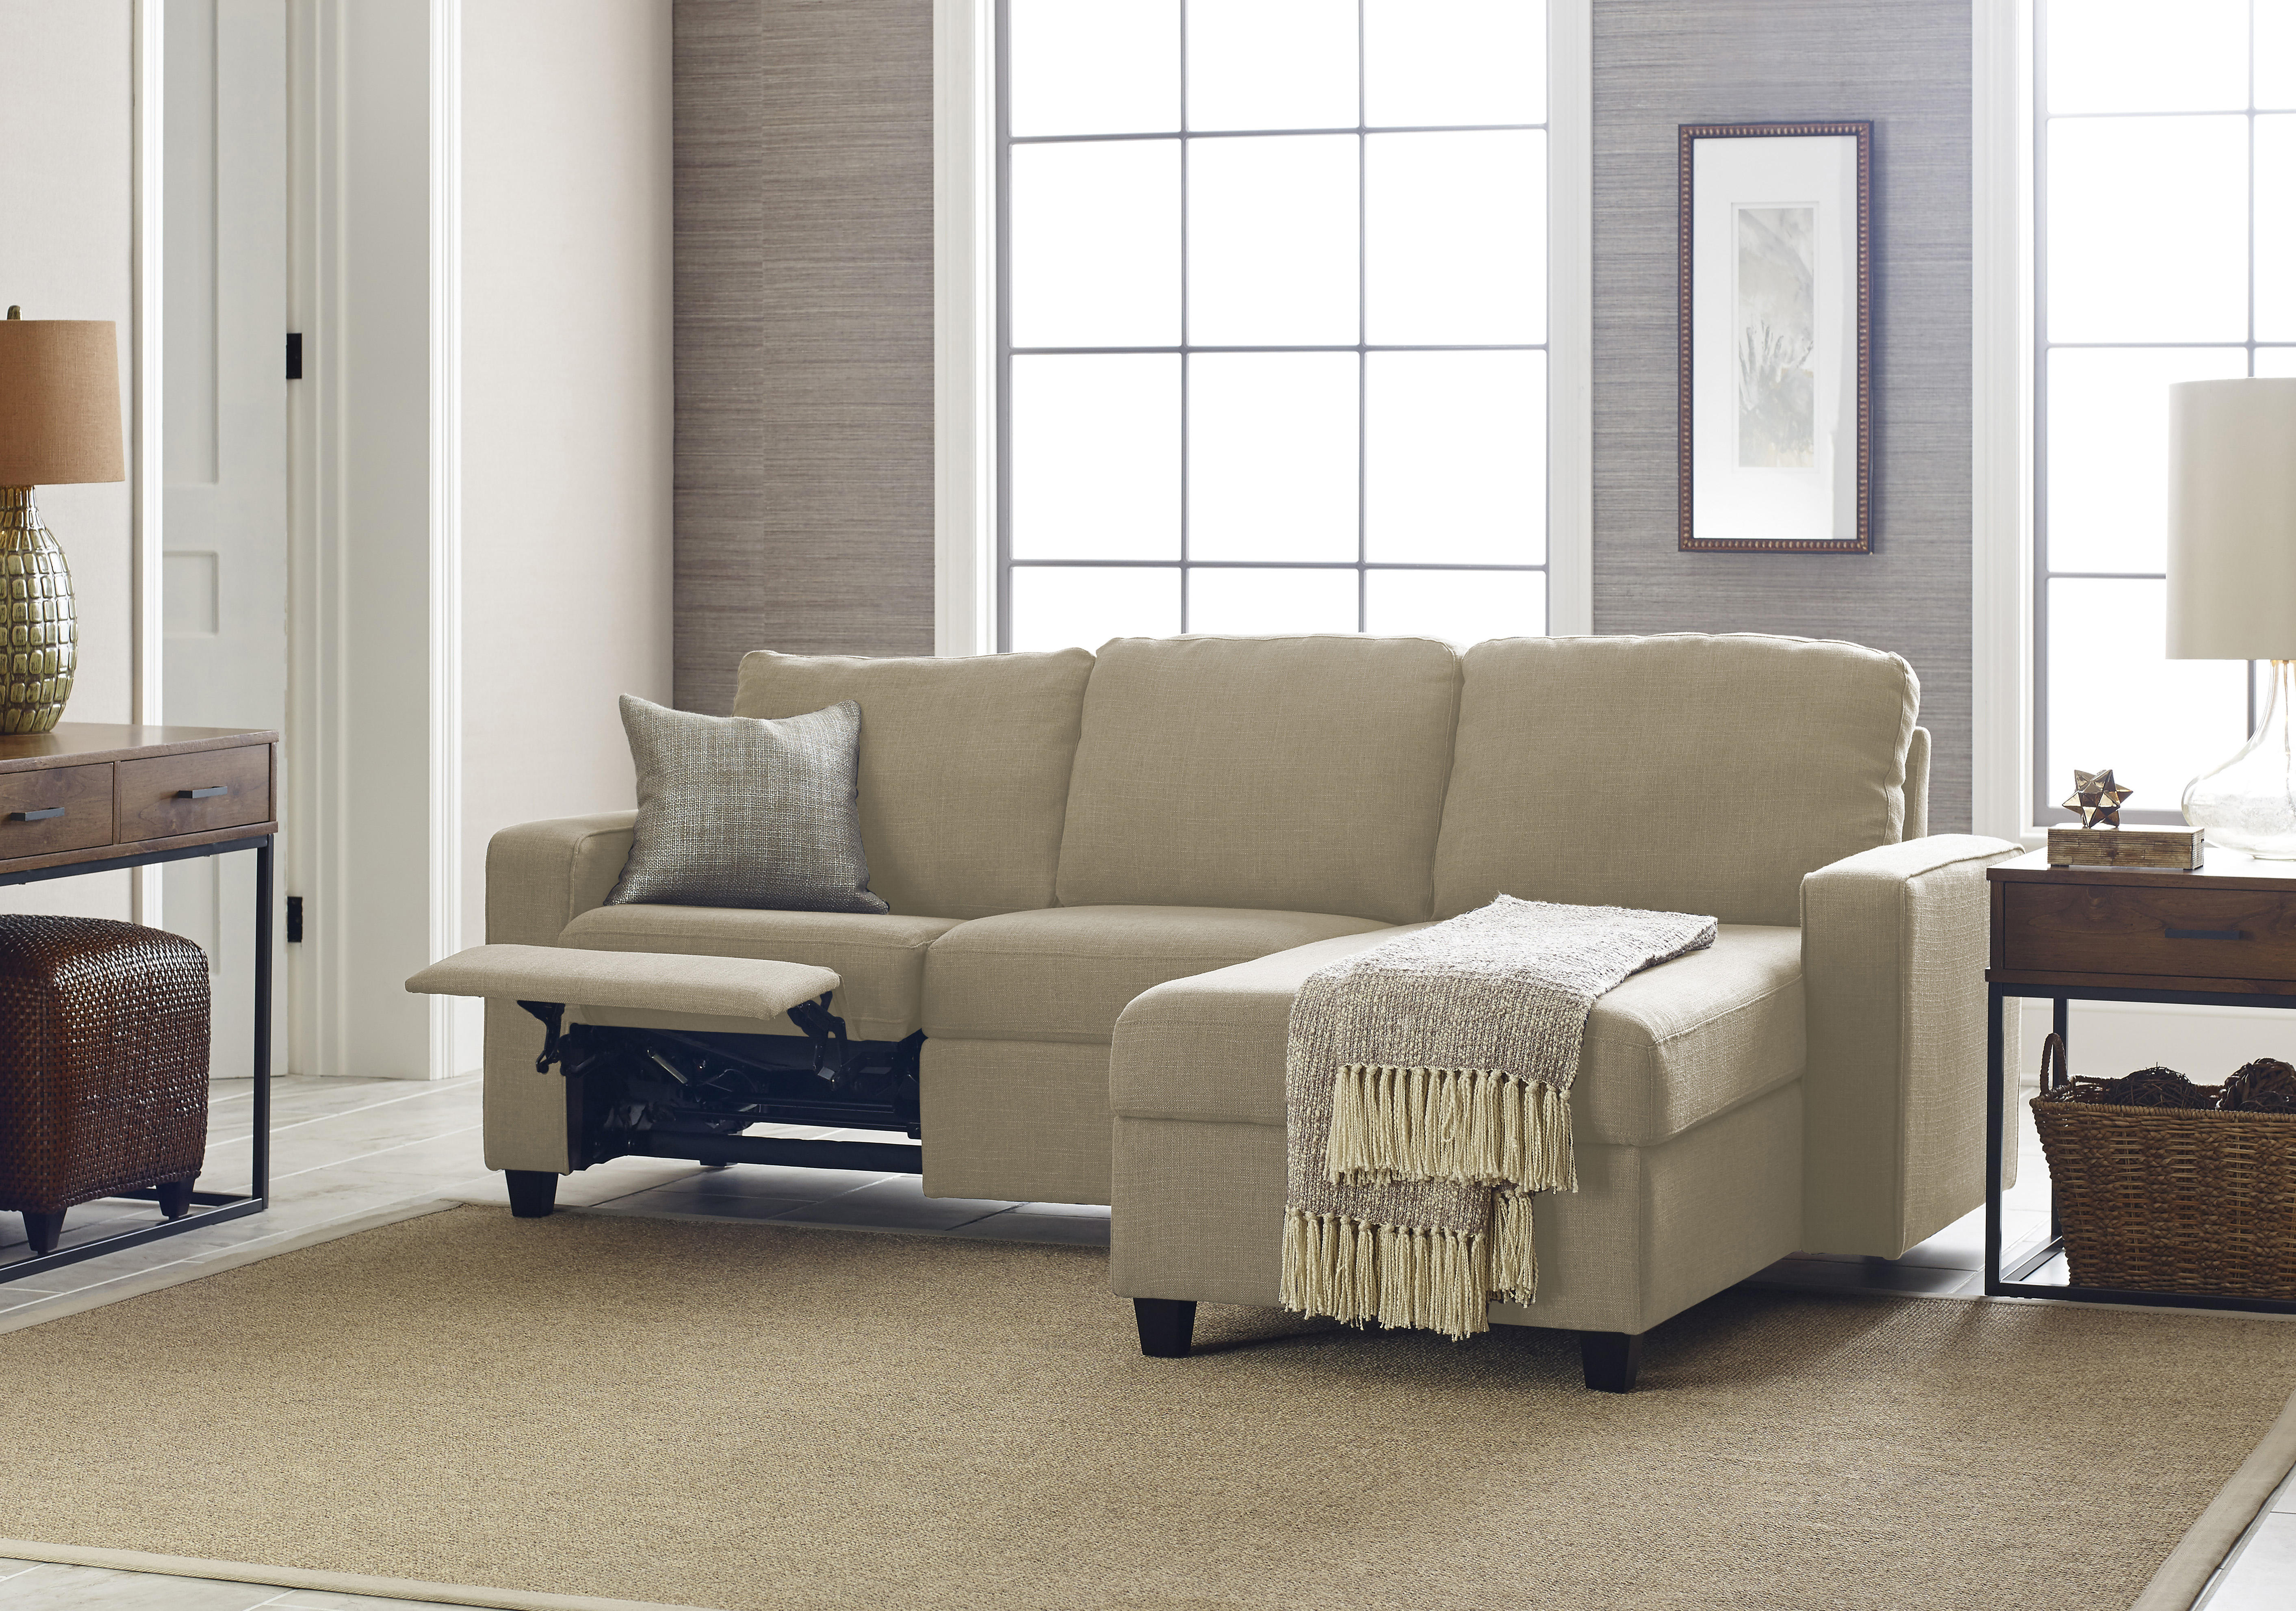 Serta Palisades Reclining Sectional with Right Storage Chaise - Oatmeal - image 1 of 9